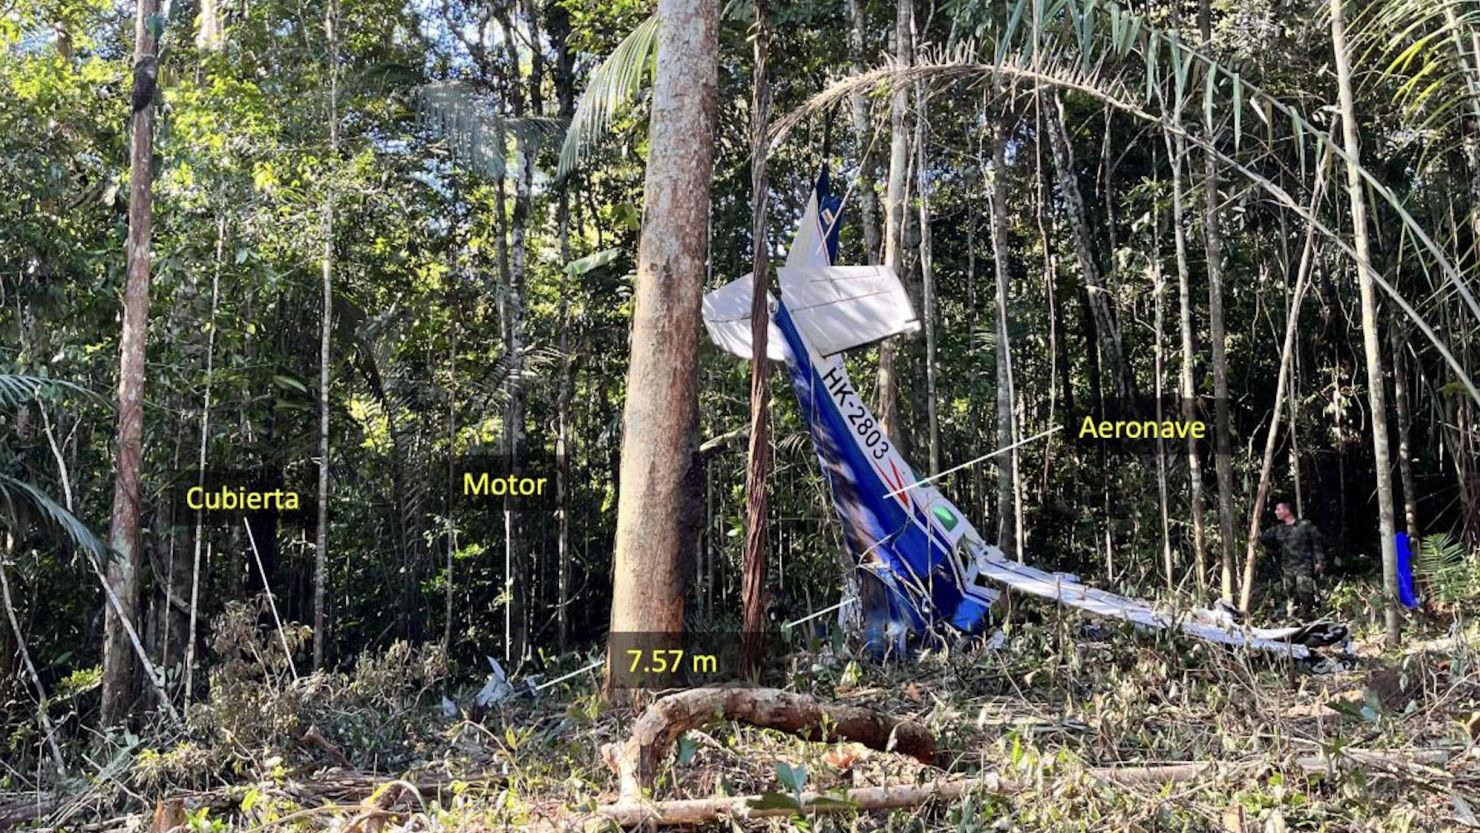 Investigators' photos of the crash scene show the raised tail of a small plane painted in still-crisp blue and white, its nose and front smashed into the jungle terrain.